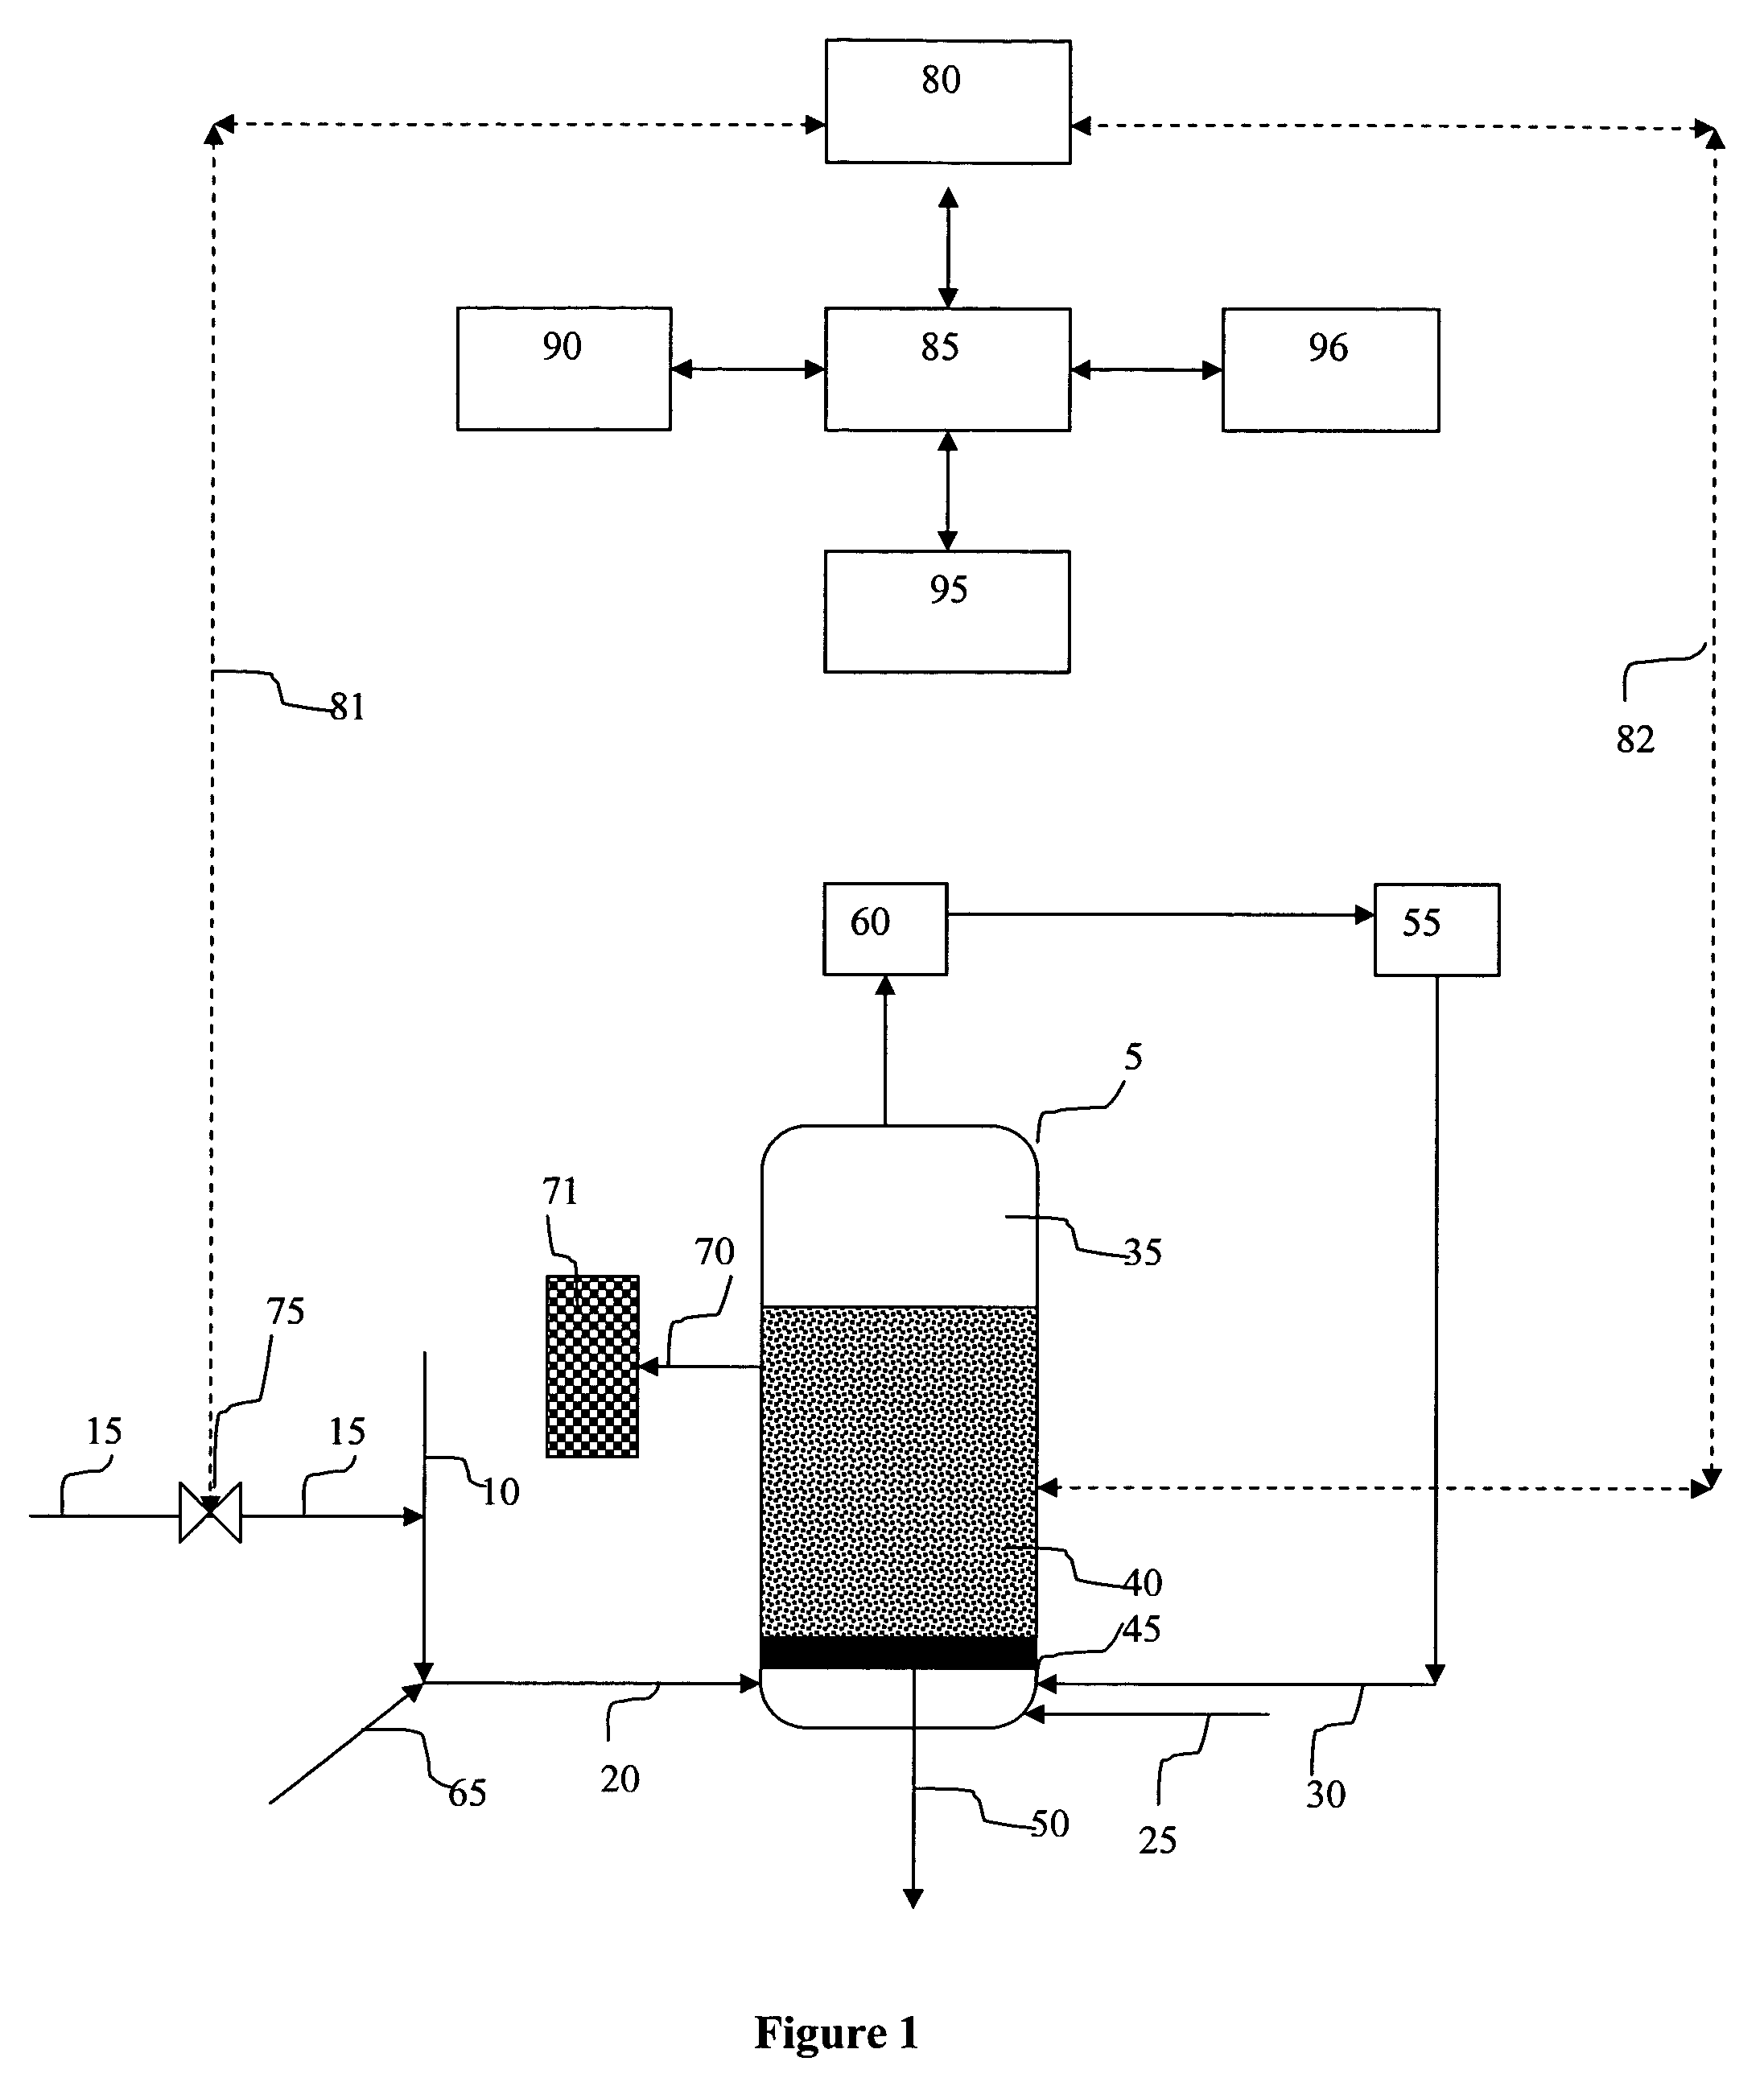 Method for polymerizing olefins in a gas phase reactor using a seedbed during start-up